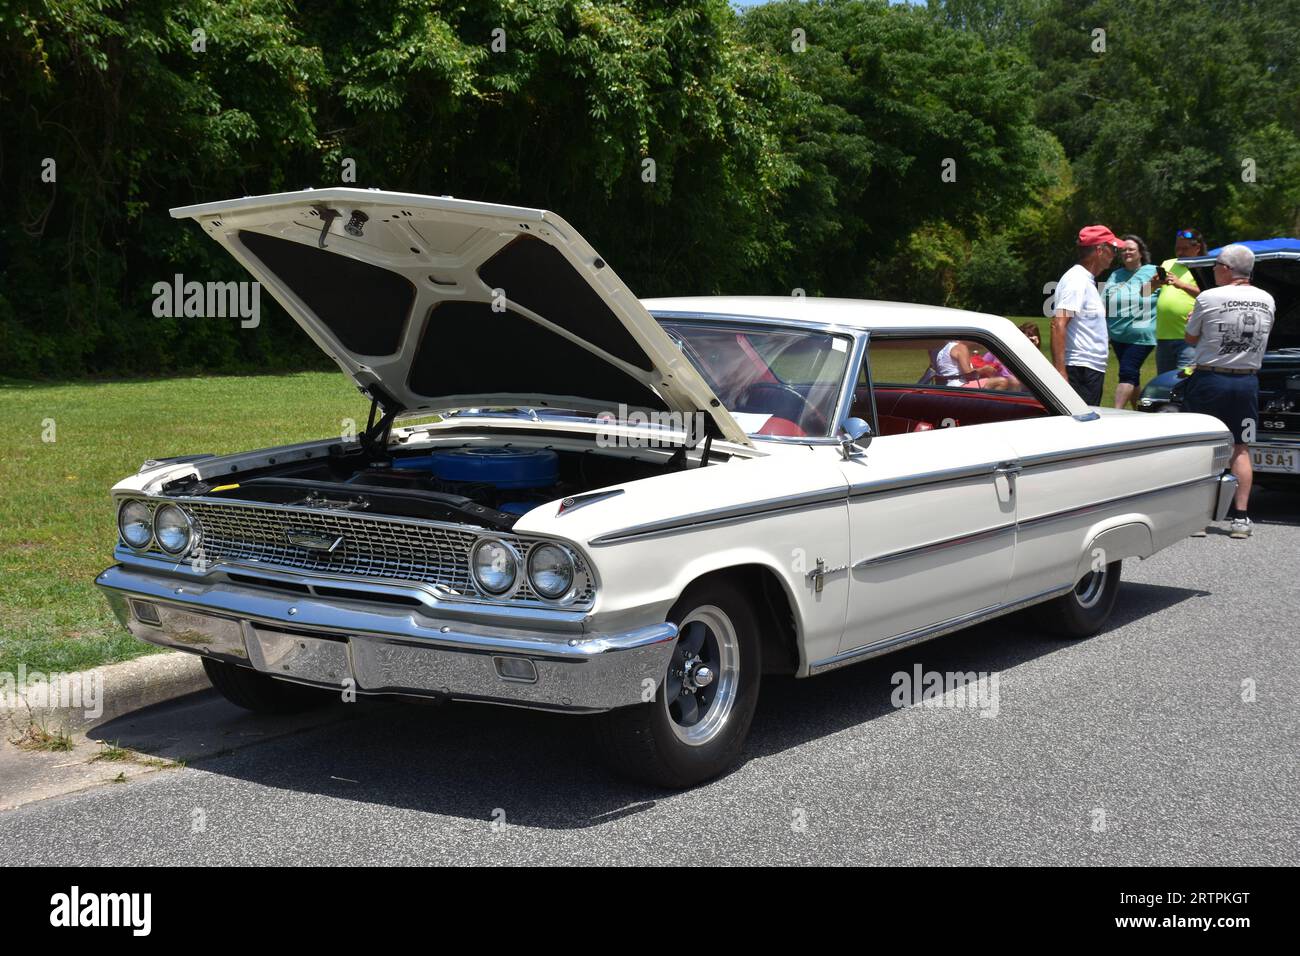 A 1963 Ford Galaxy 500 on display at a car show. Stock Photo